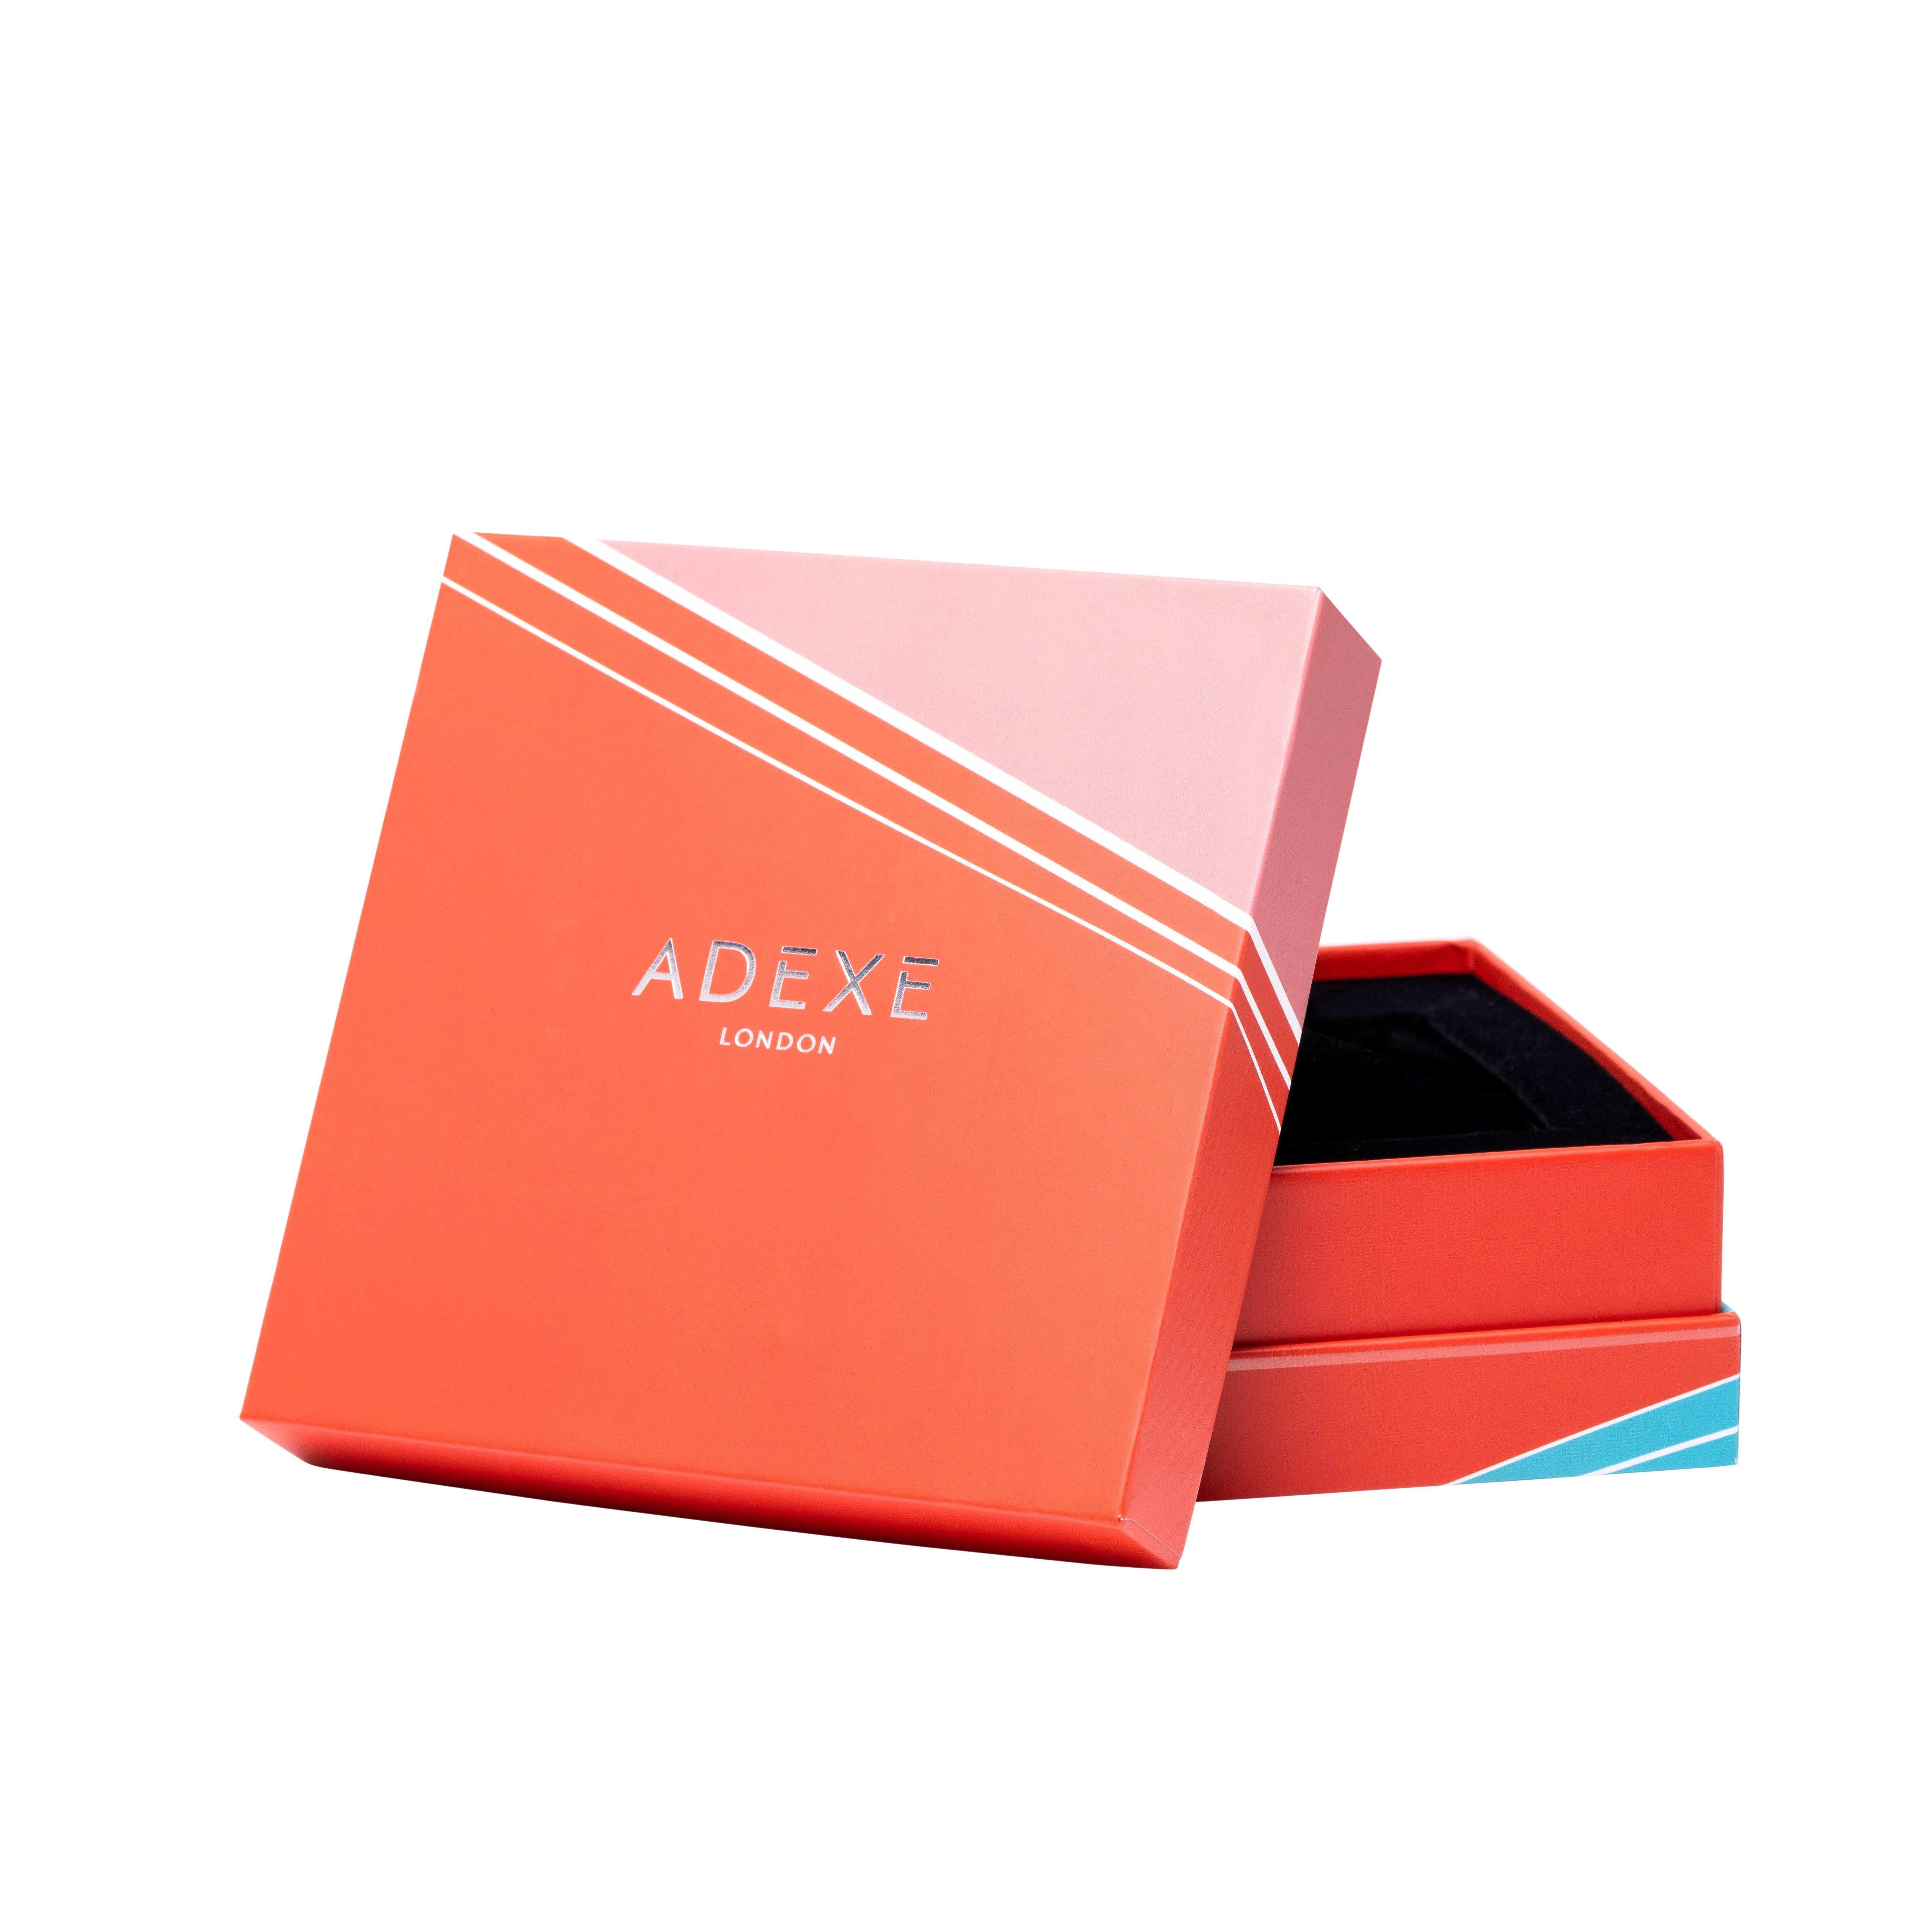 adexe watch price